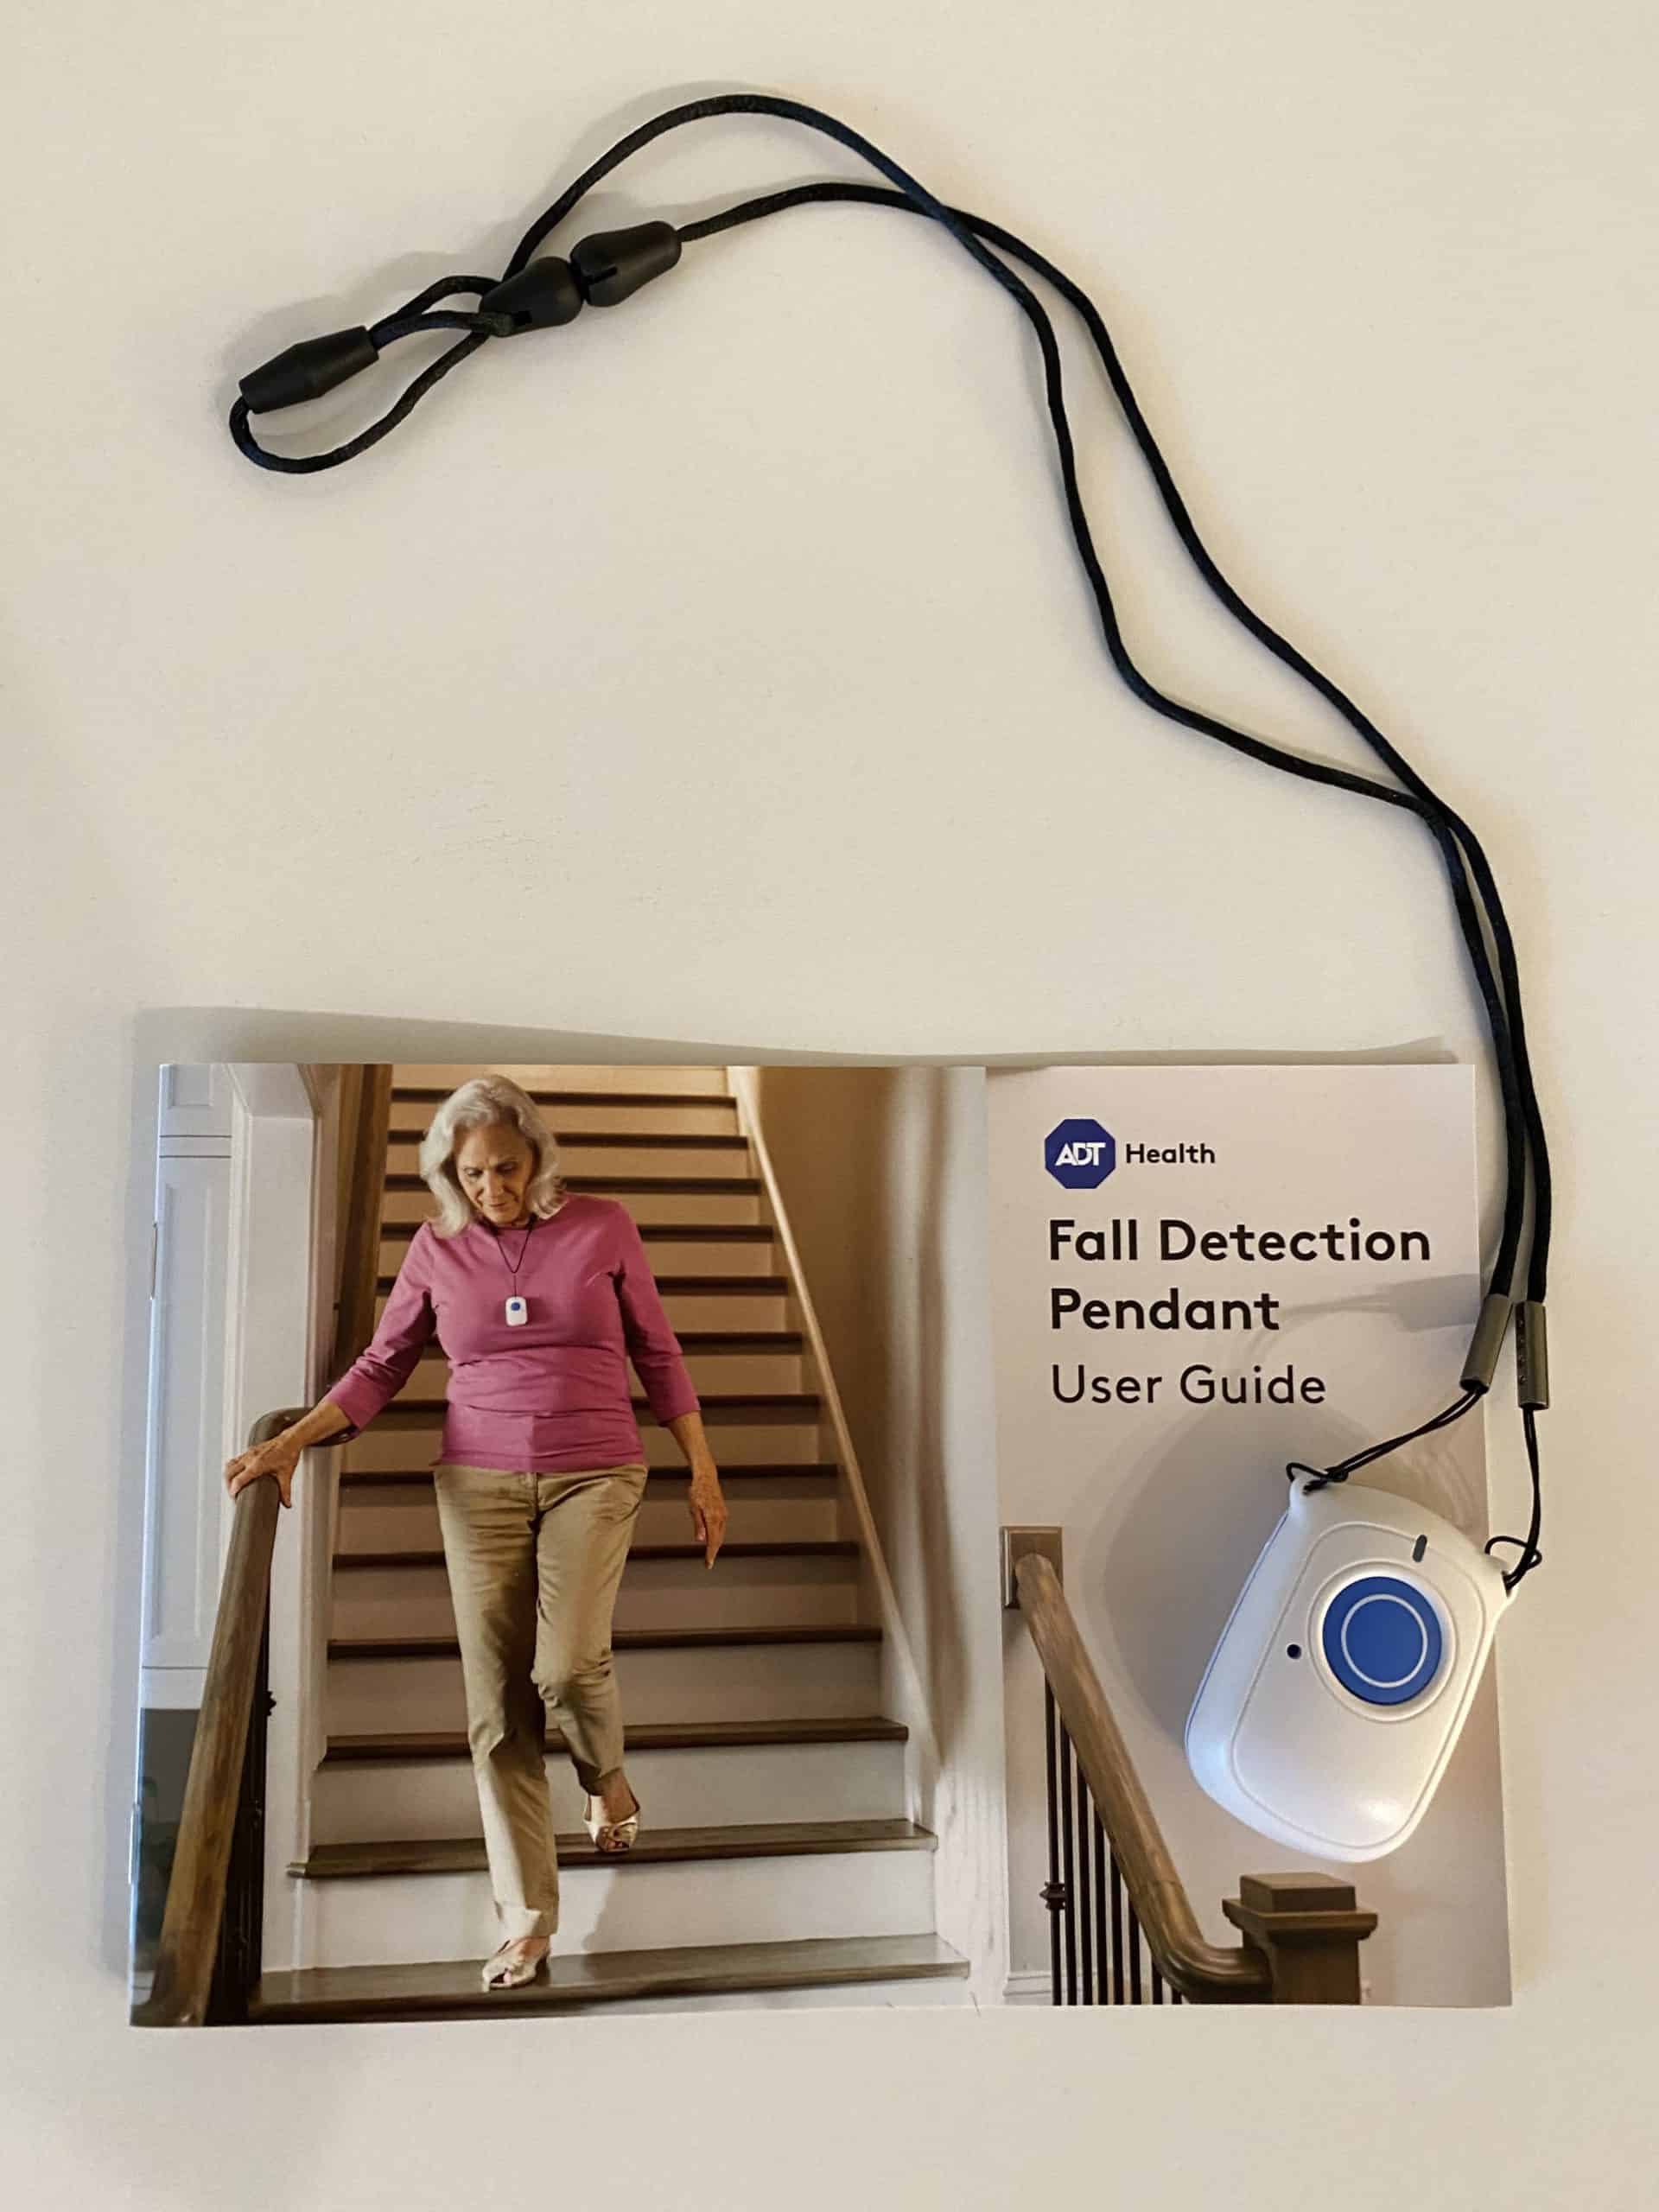 My automatic fall detection pendant from ADT Health